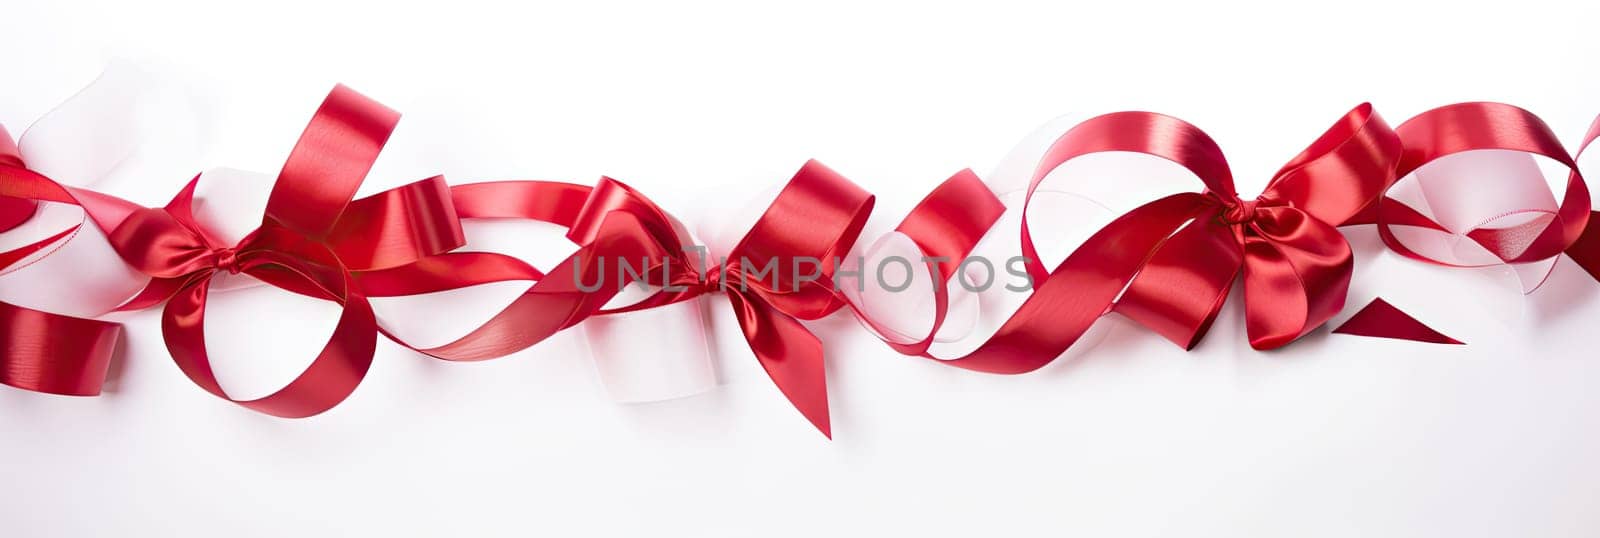 An image of a red silk ribbon on a pure white background, designed to add joy, brightness and festive mood to any celebration.